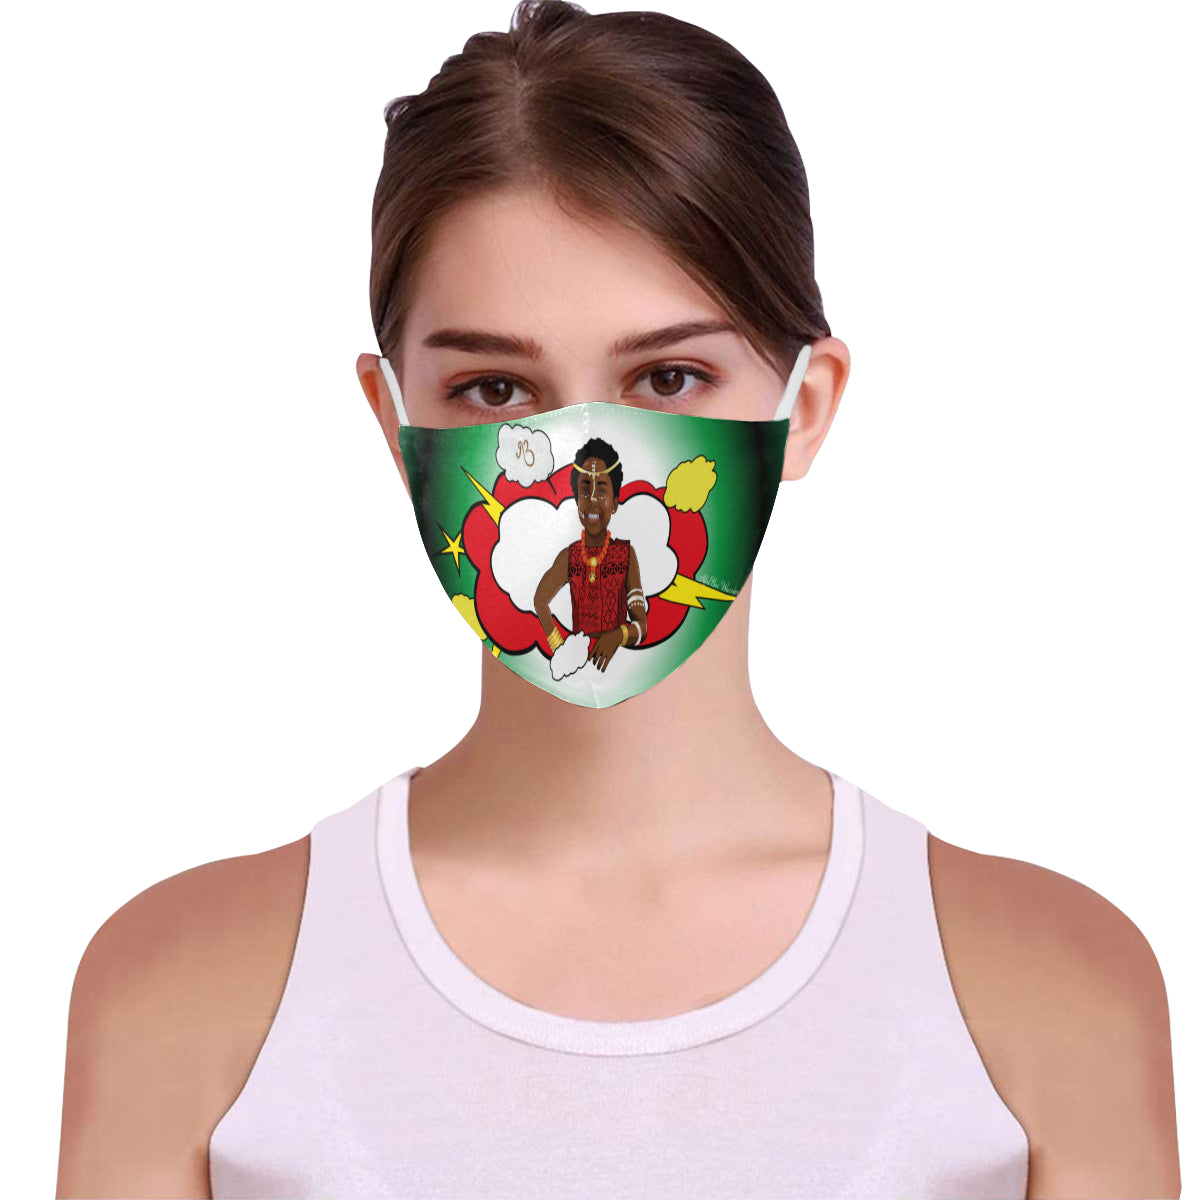 AfriBix Warrior Princess Cotton Fabric Face Mask with Filter Slot & Adjustable Strap (Pack of 5) - Non-medical use